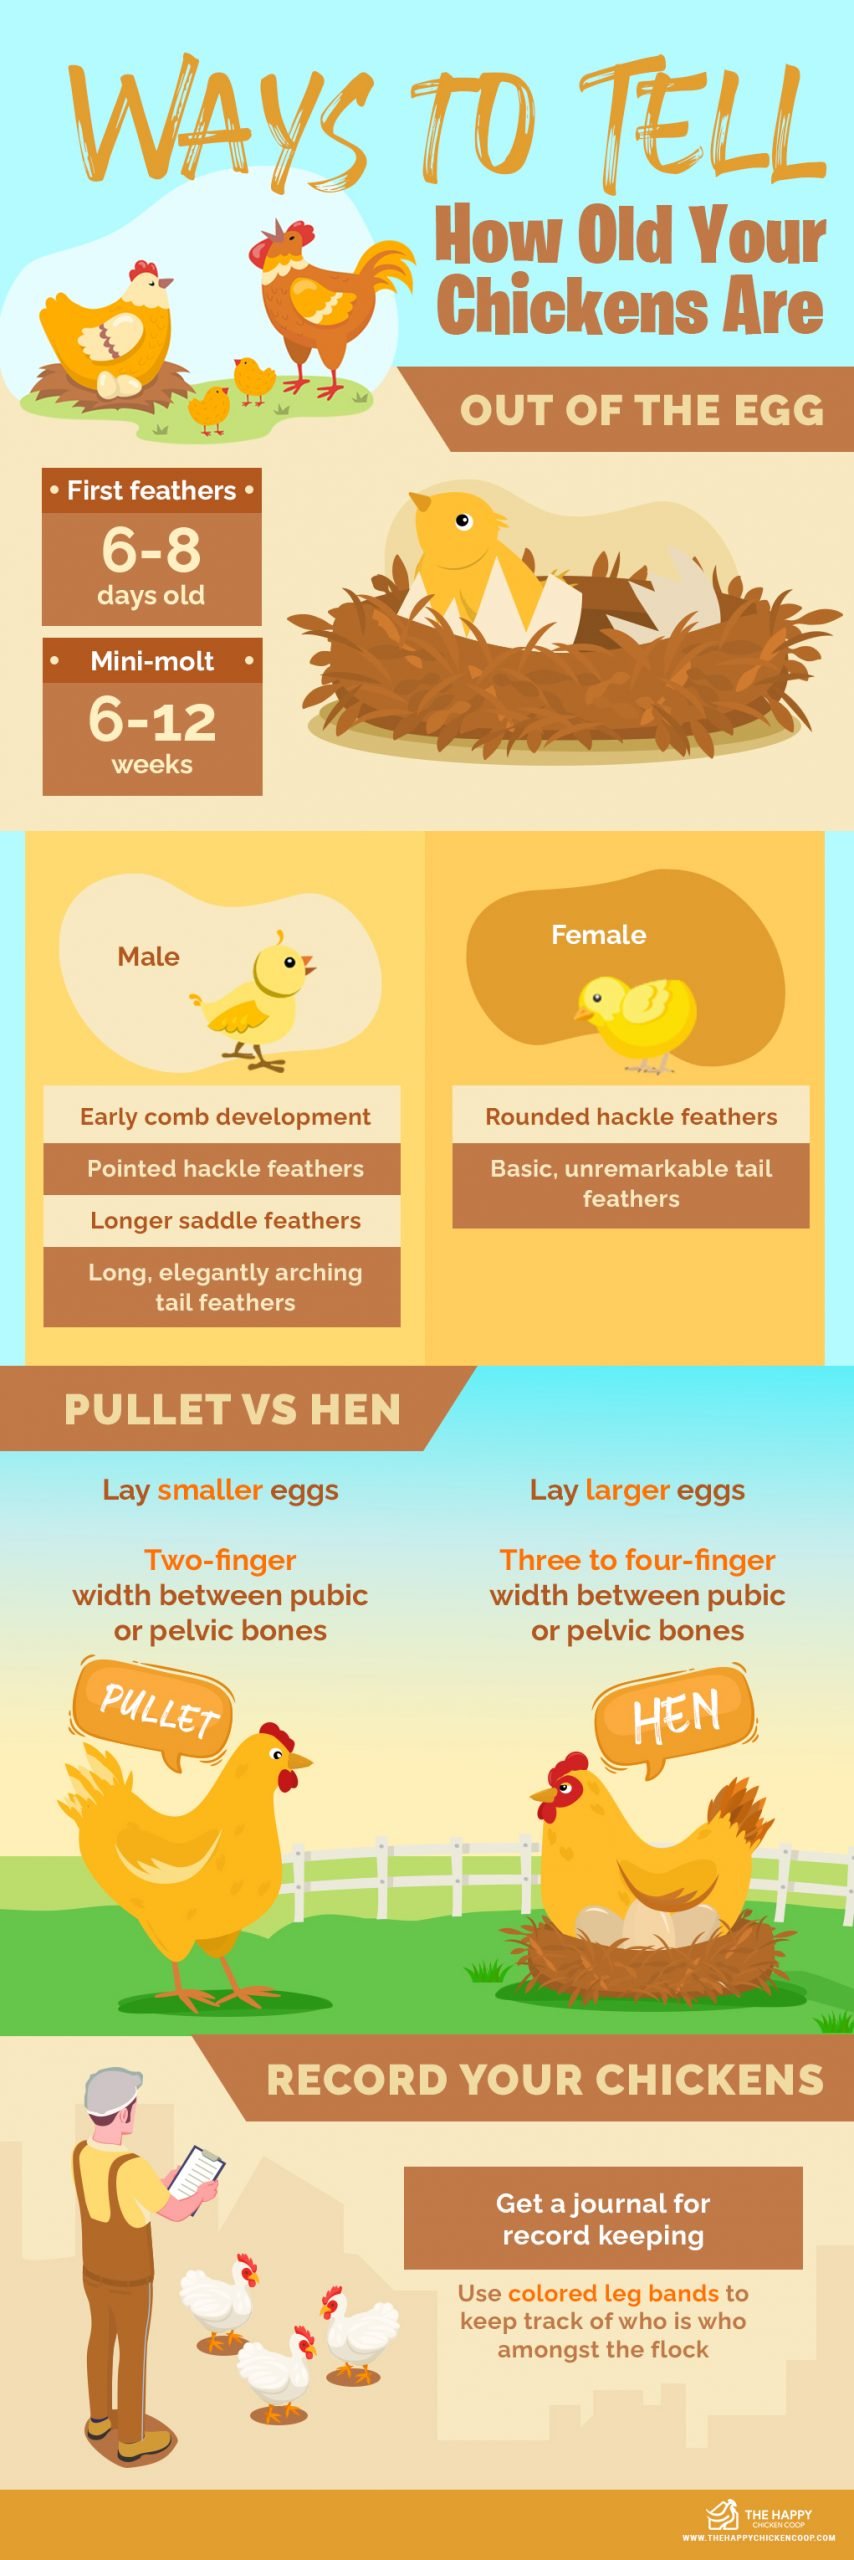 How Old Are Your Chickens